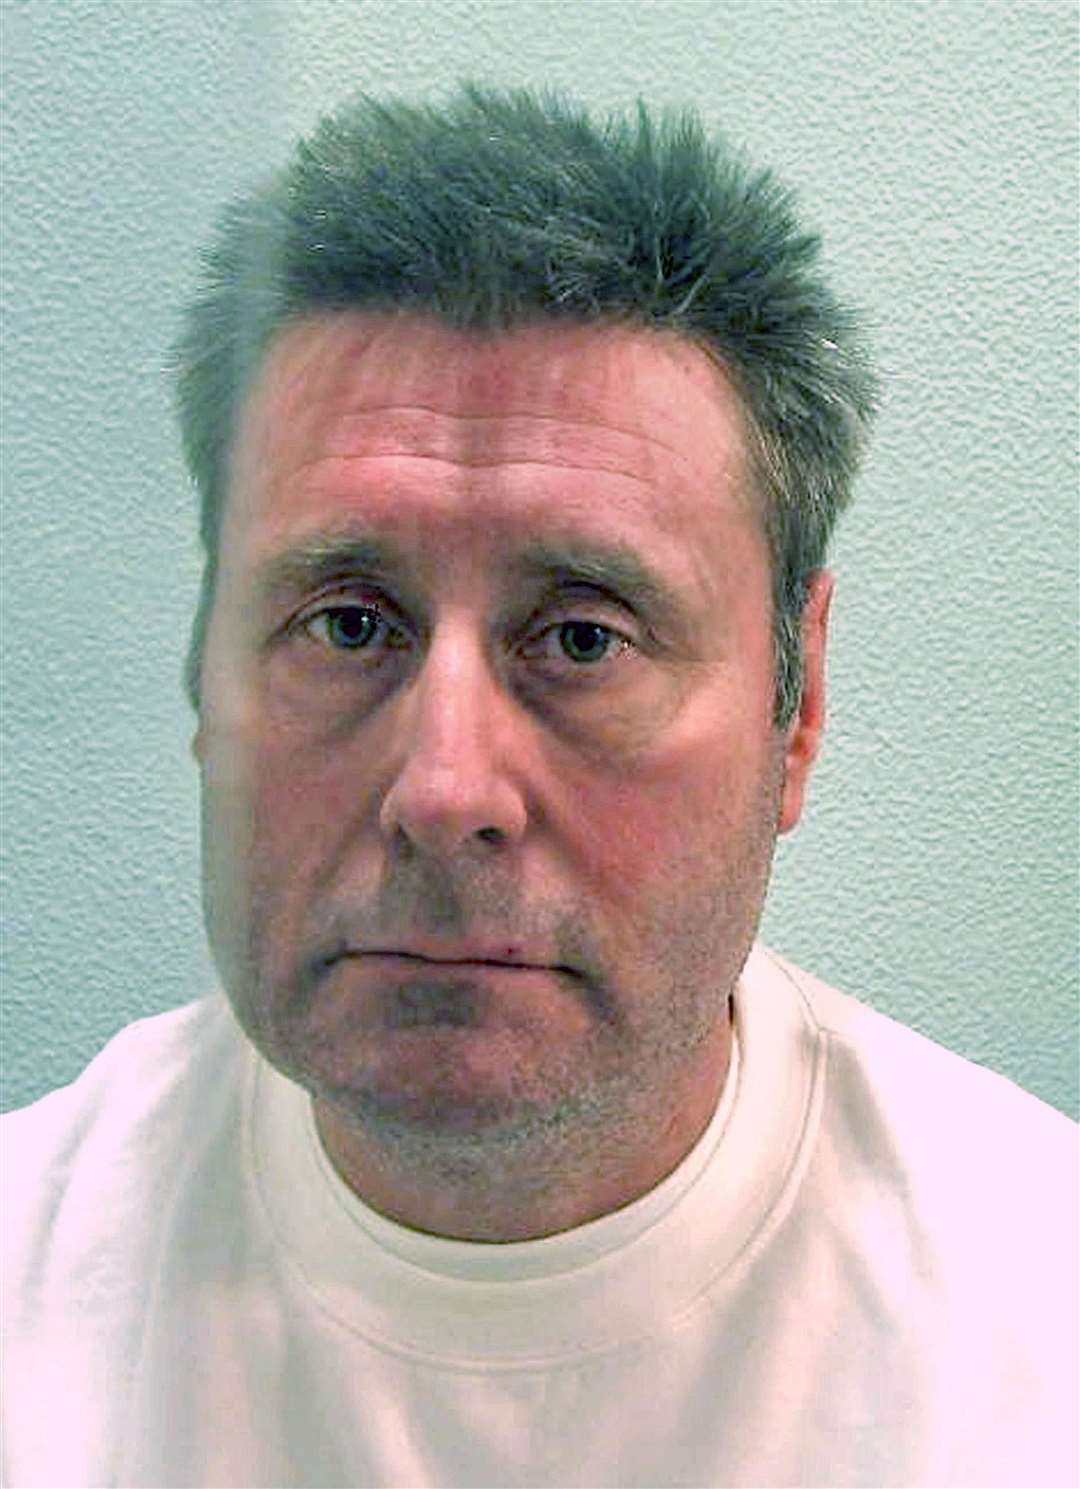 Police believe black cab rapist John Worboys committed sex offences against more than 100 women before he was caught (Metropolitan Police/PA)